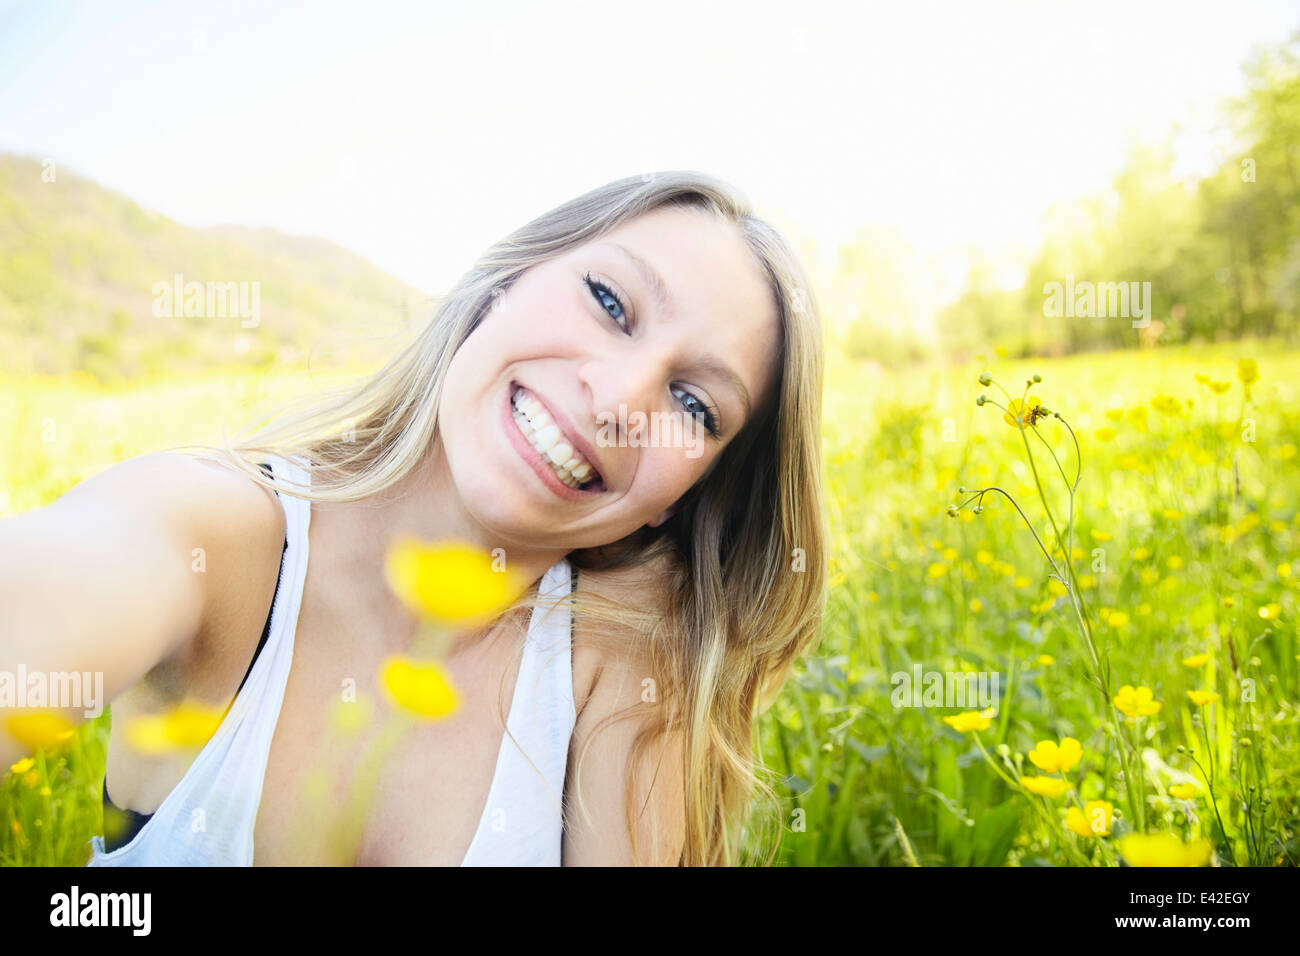 Young woman with blonde hair smiling, portrait Stock Photo